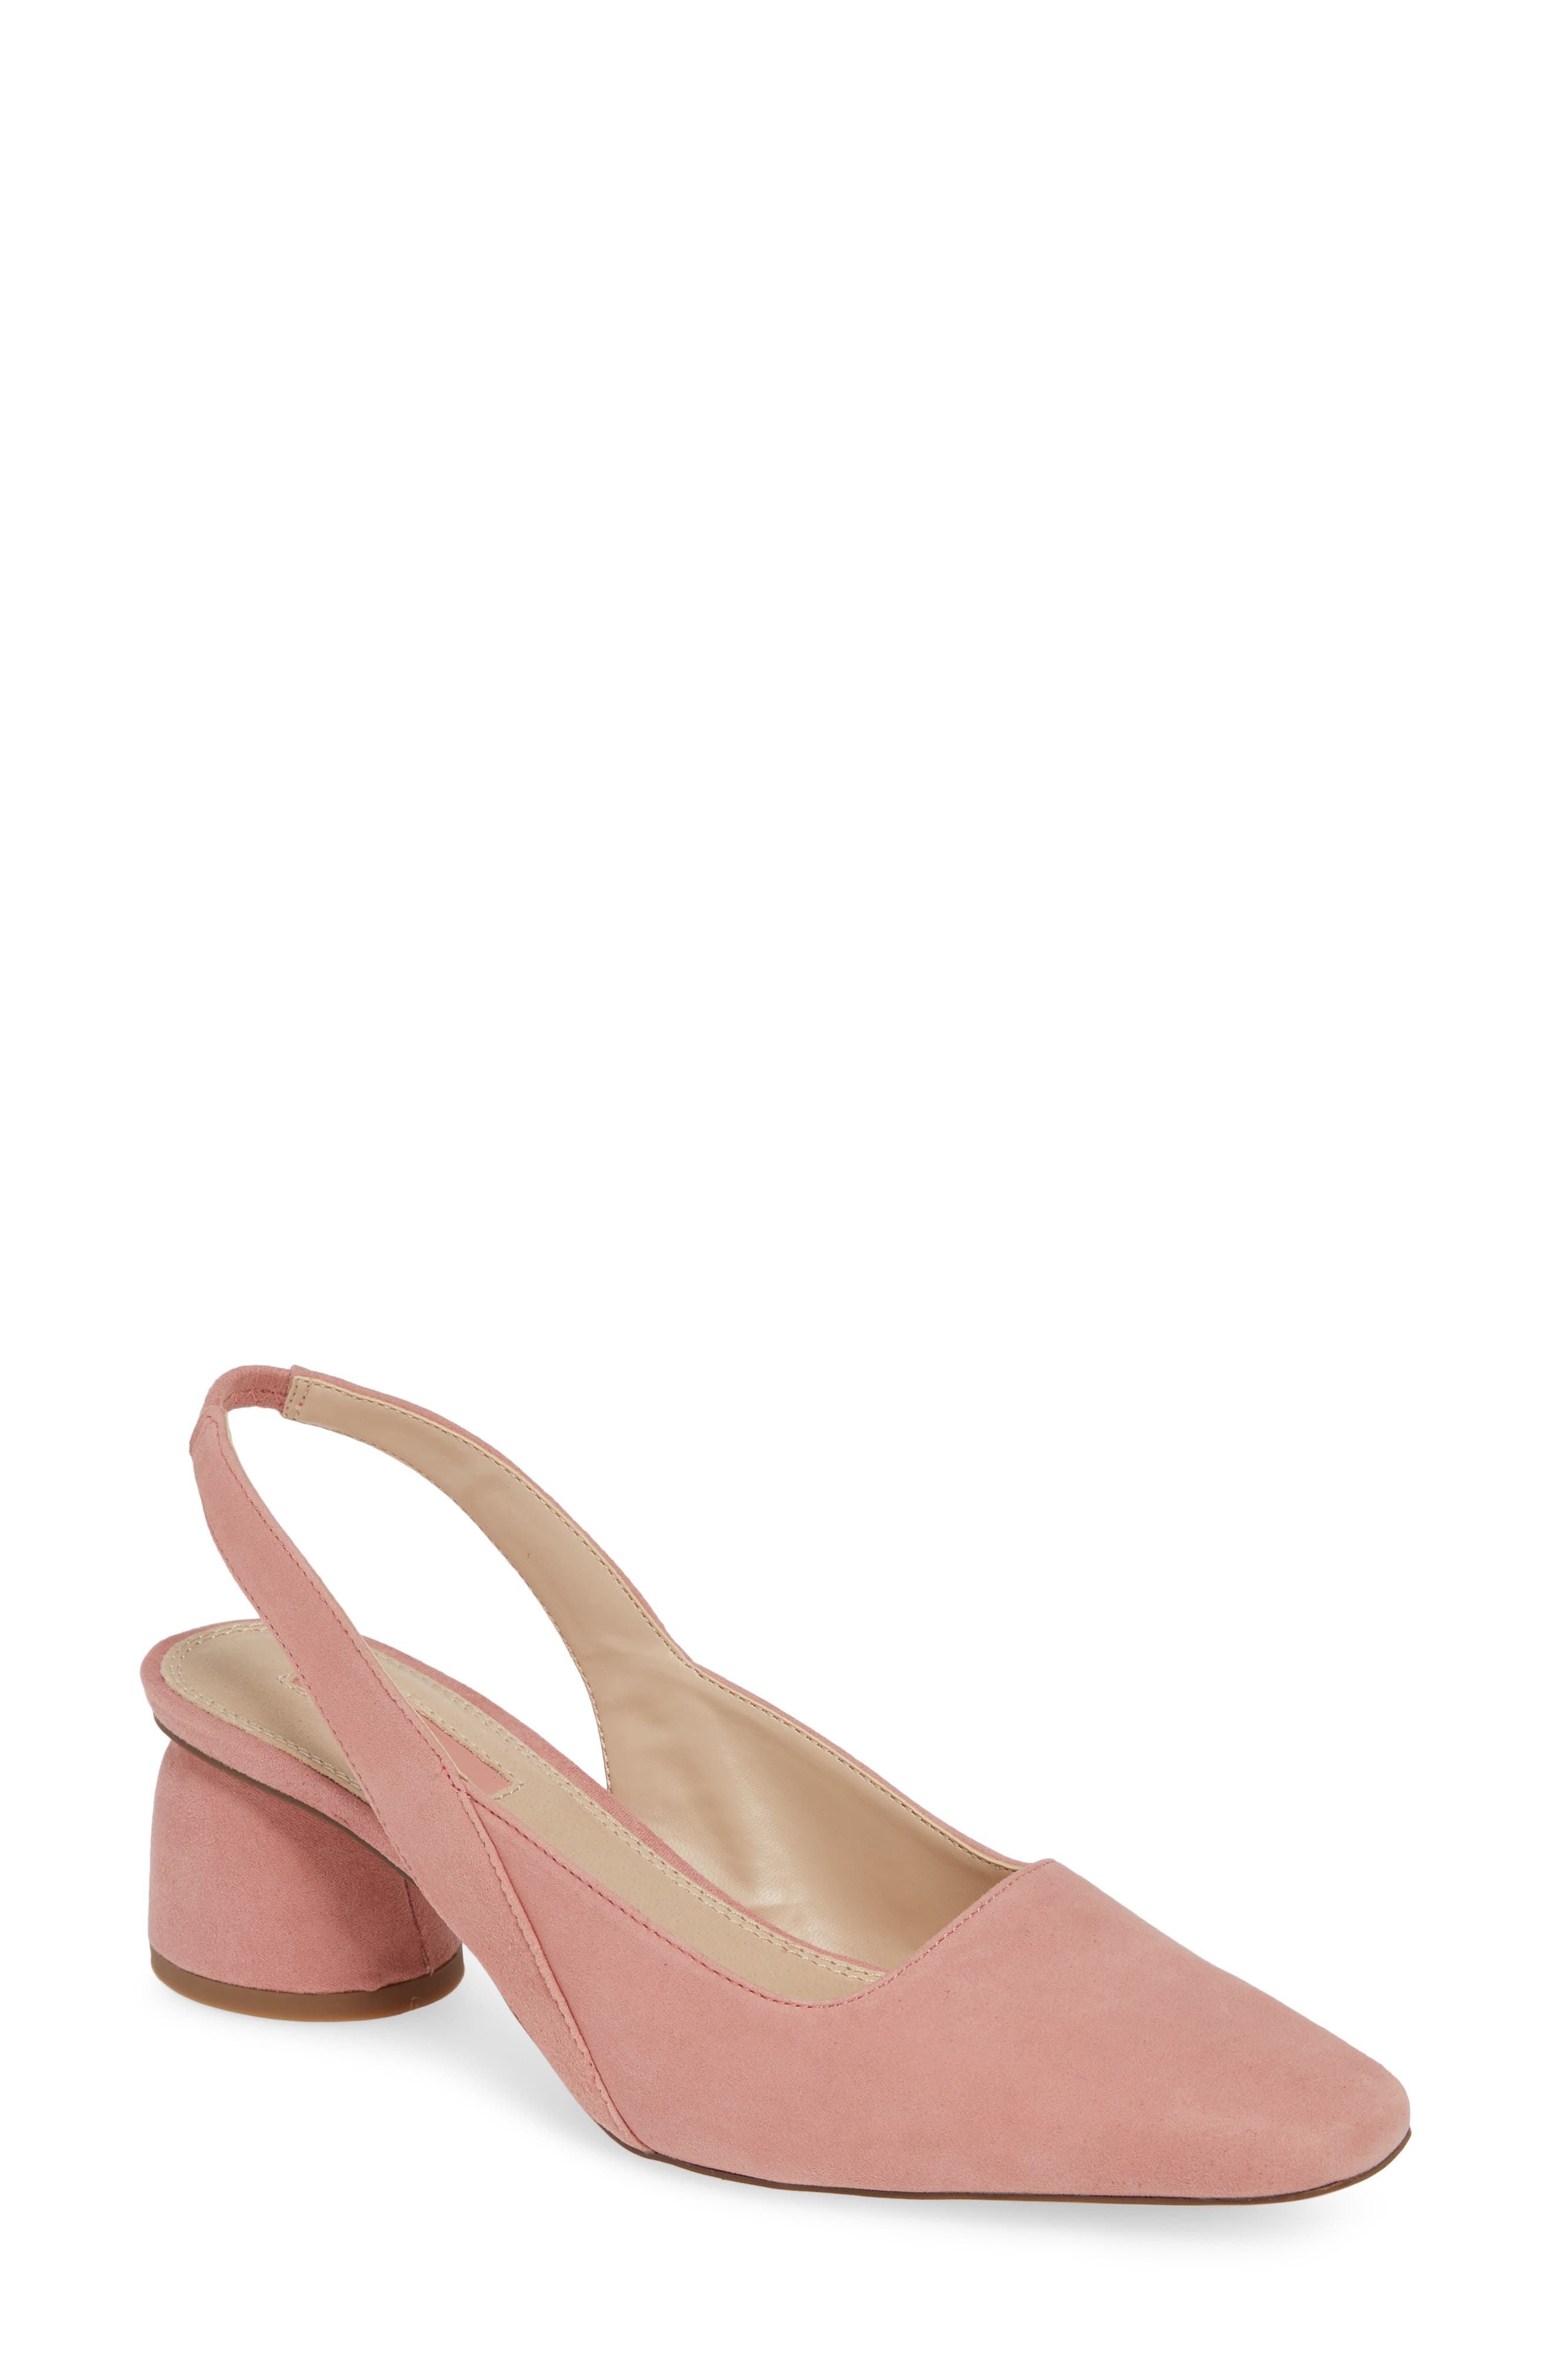 justify slingback shoes